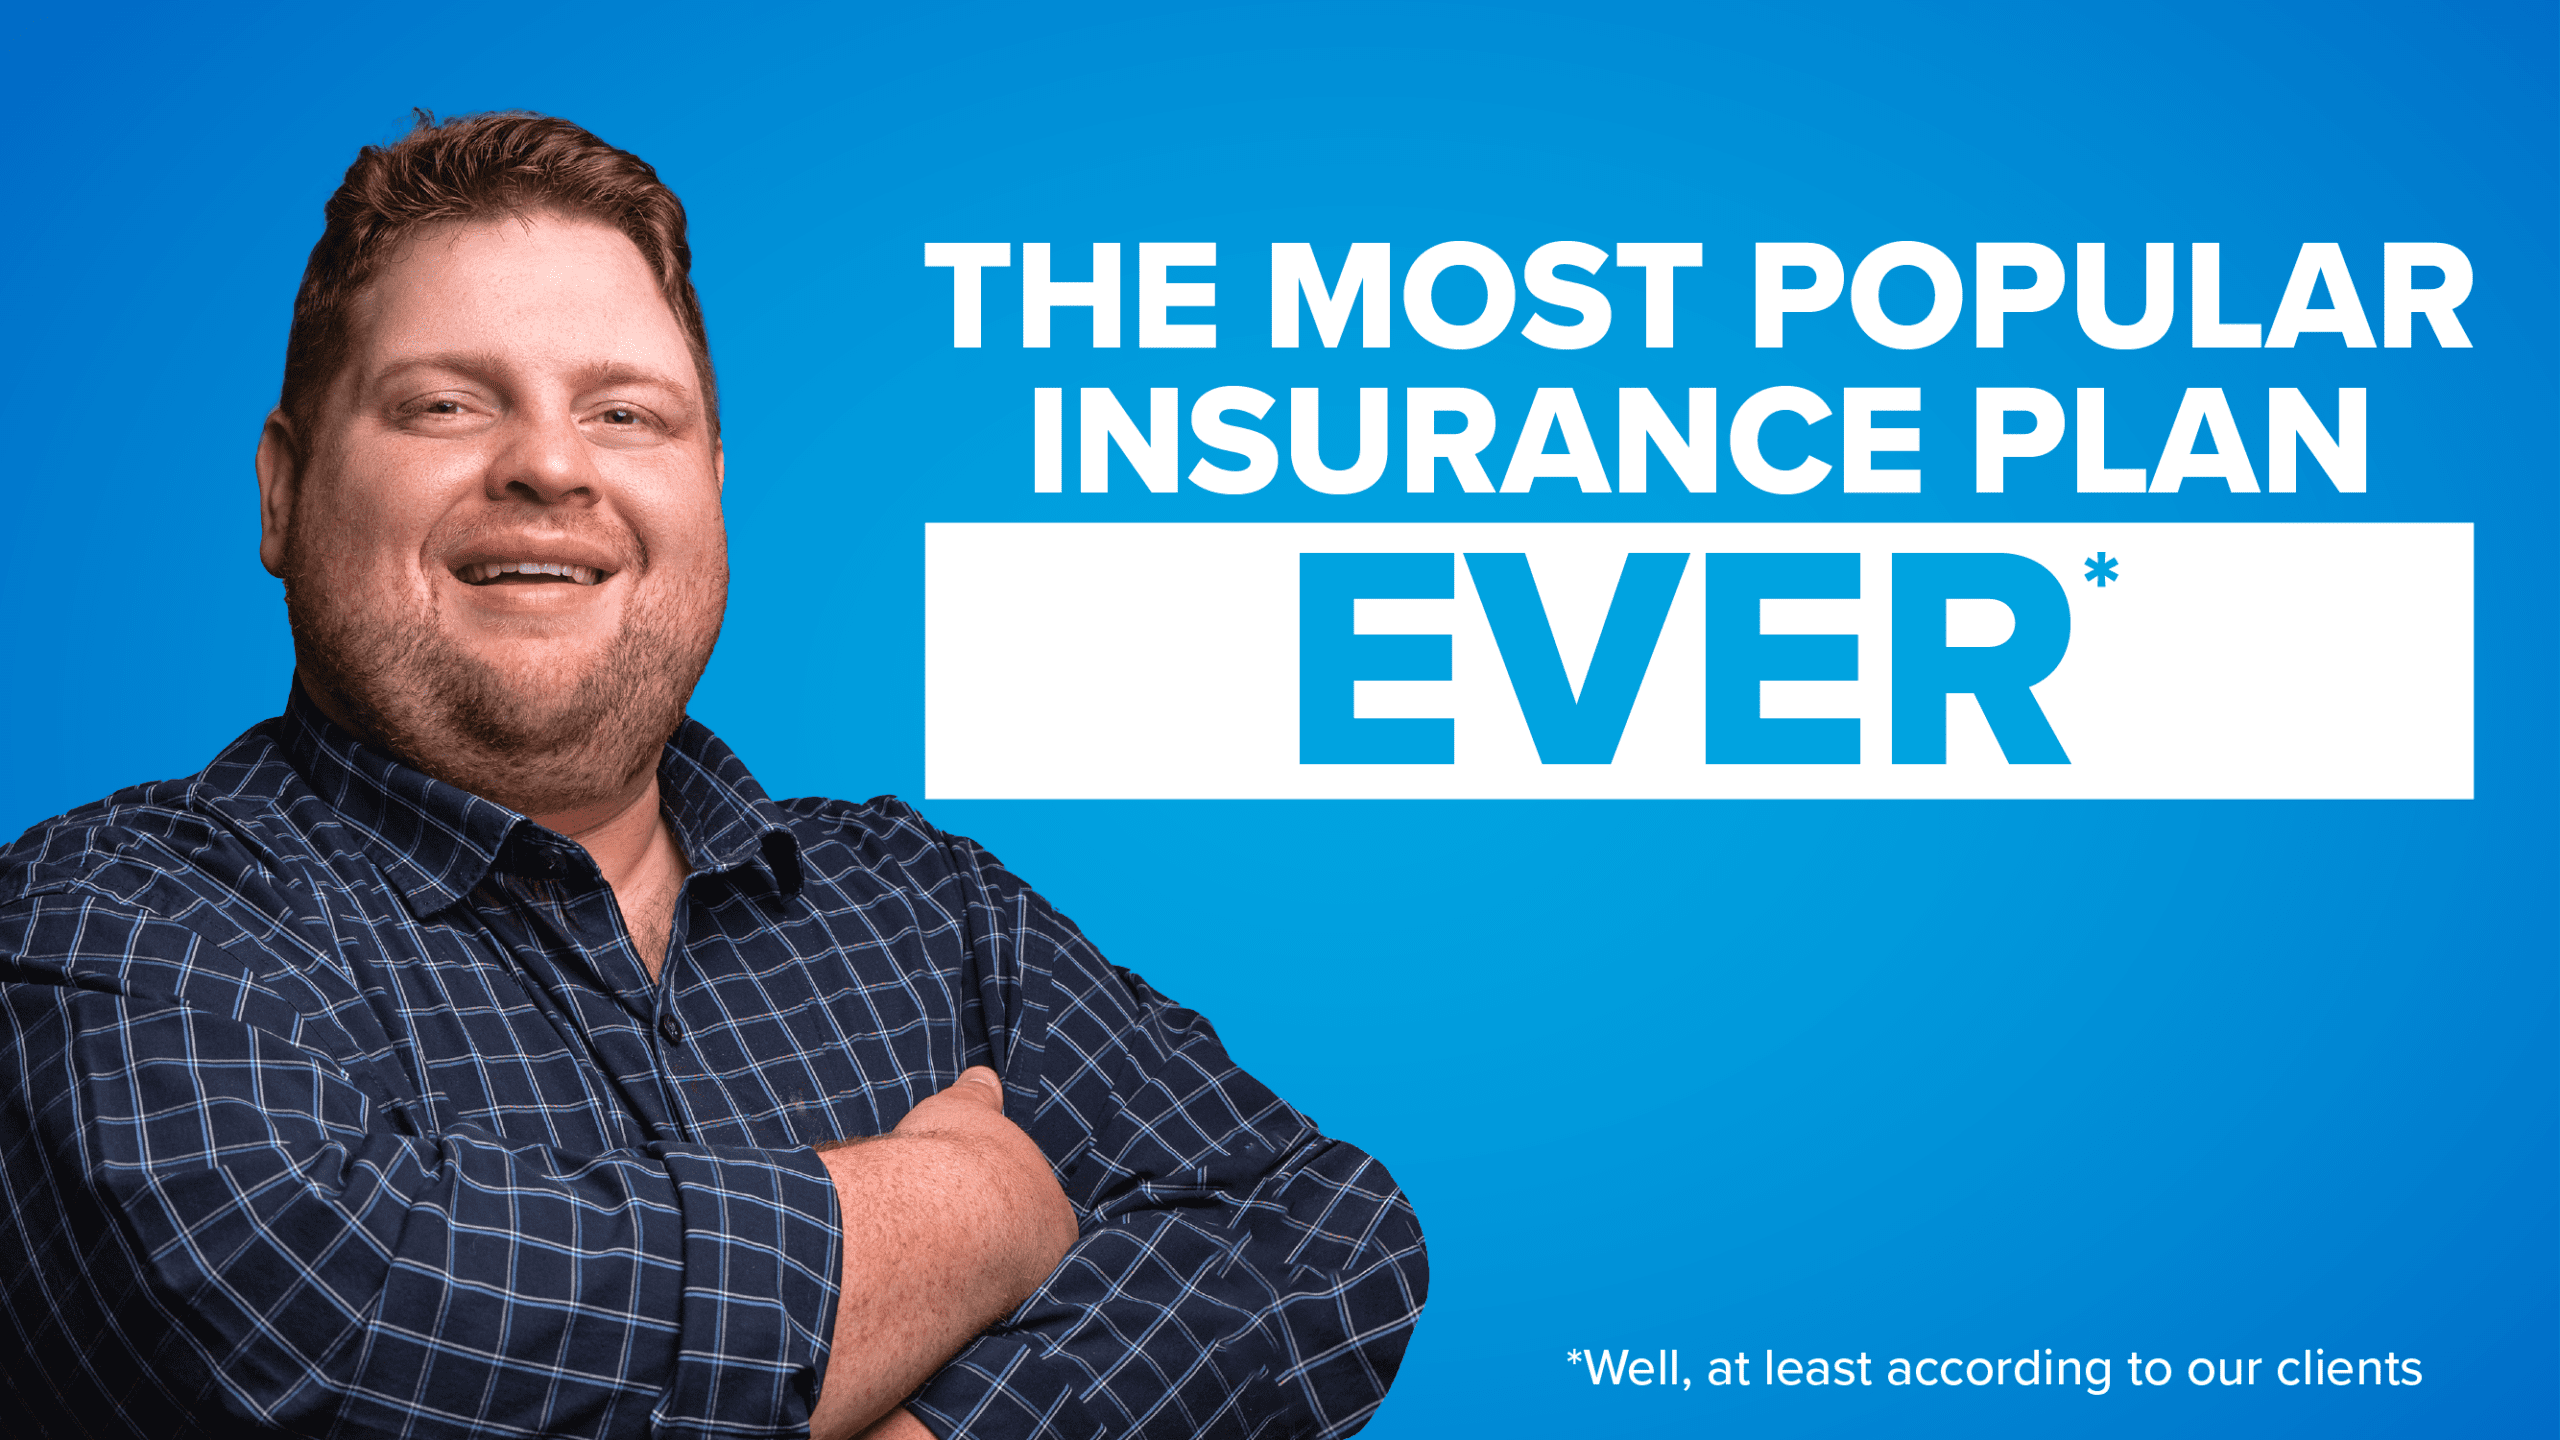 The Most Popular Insurance Plan Ever